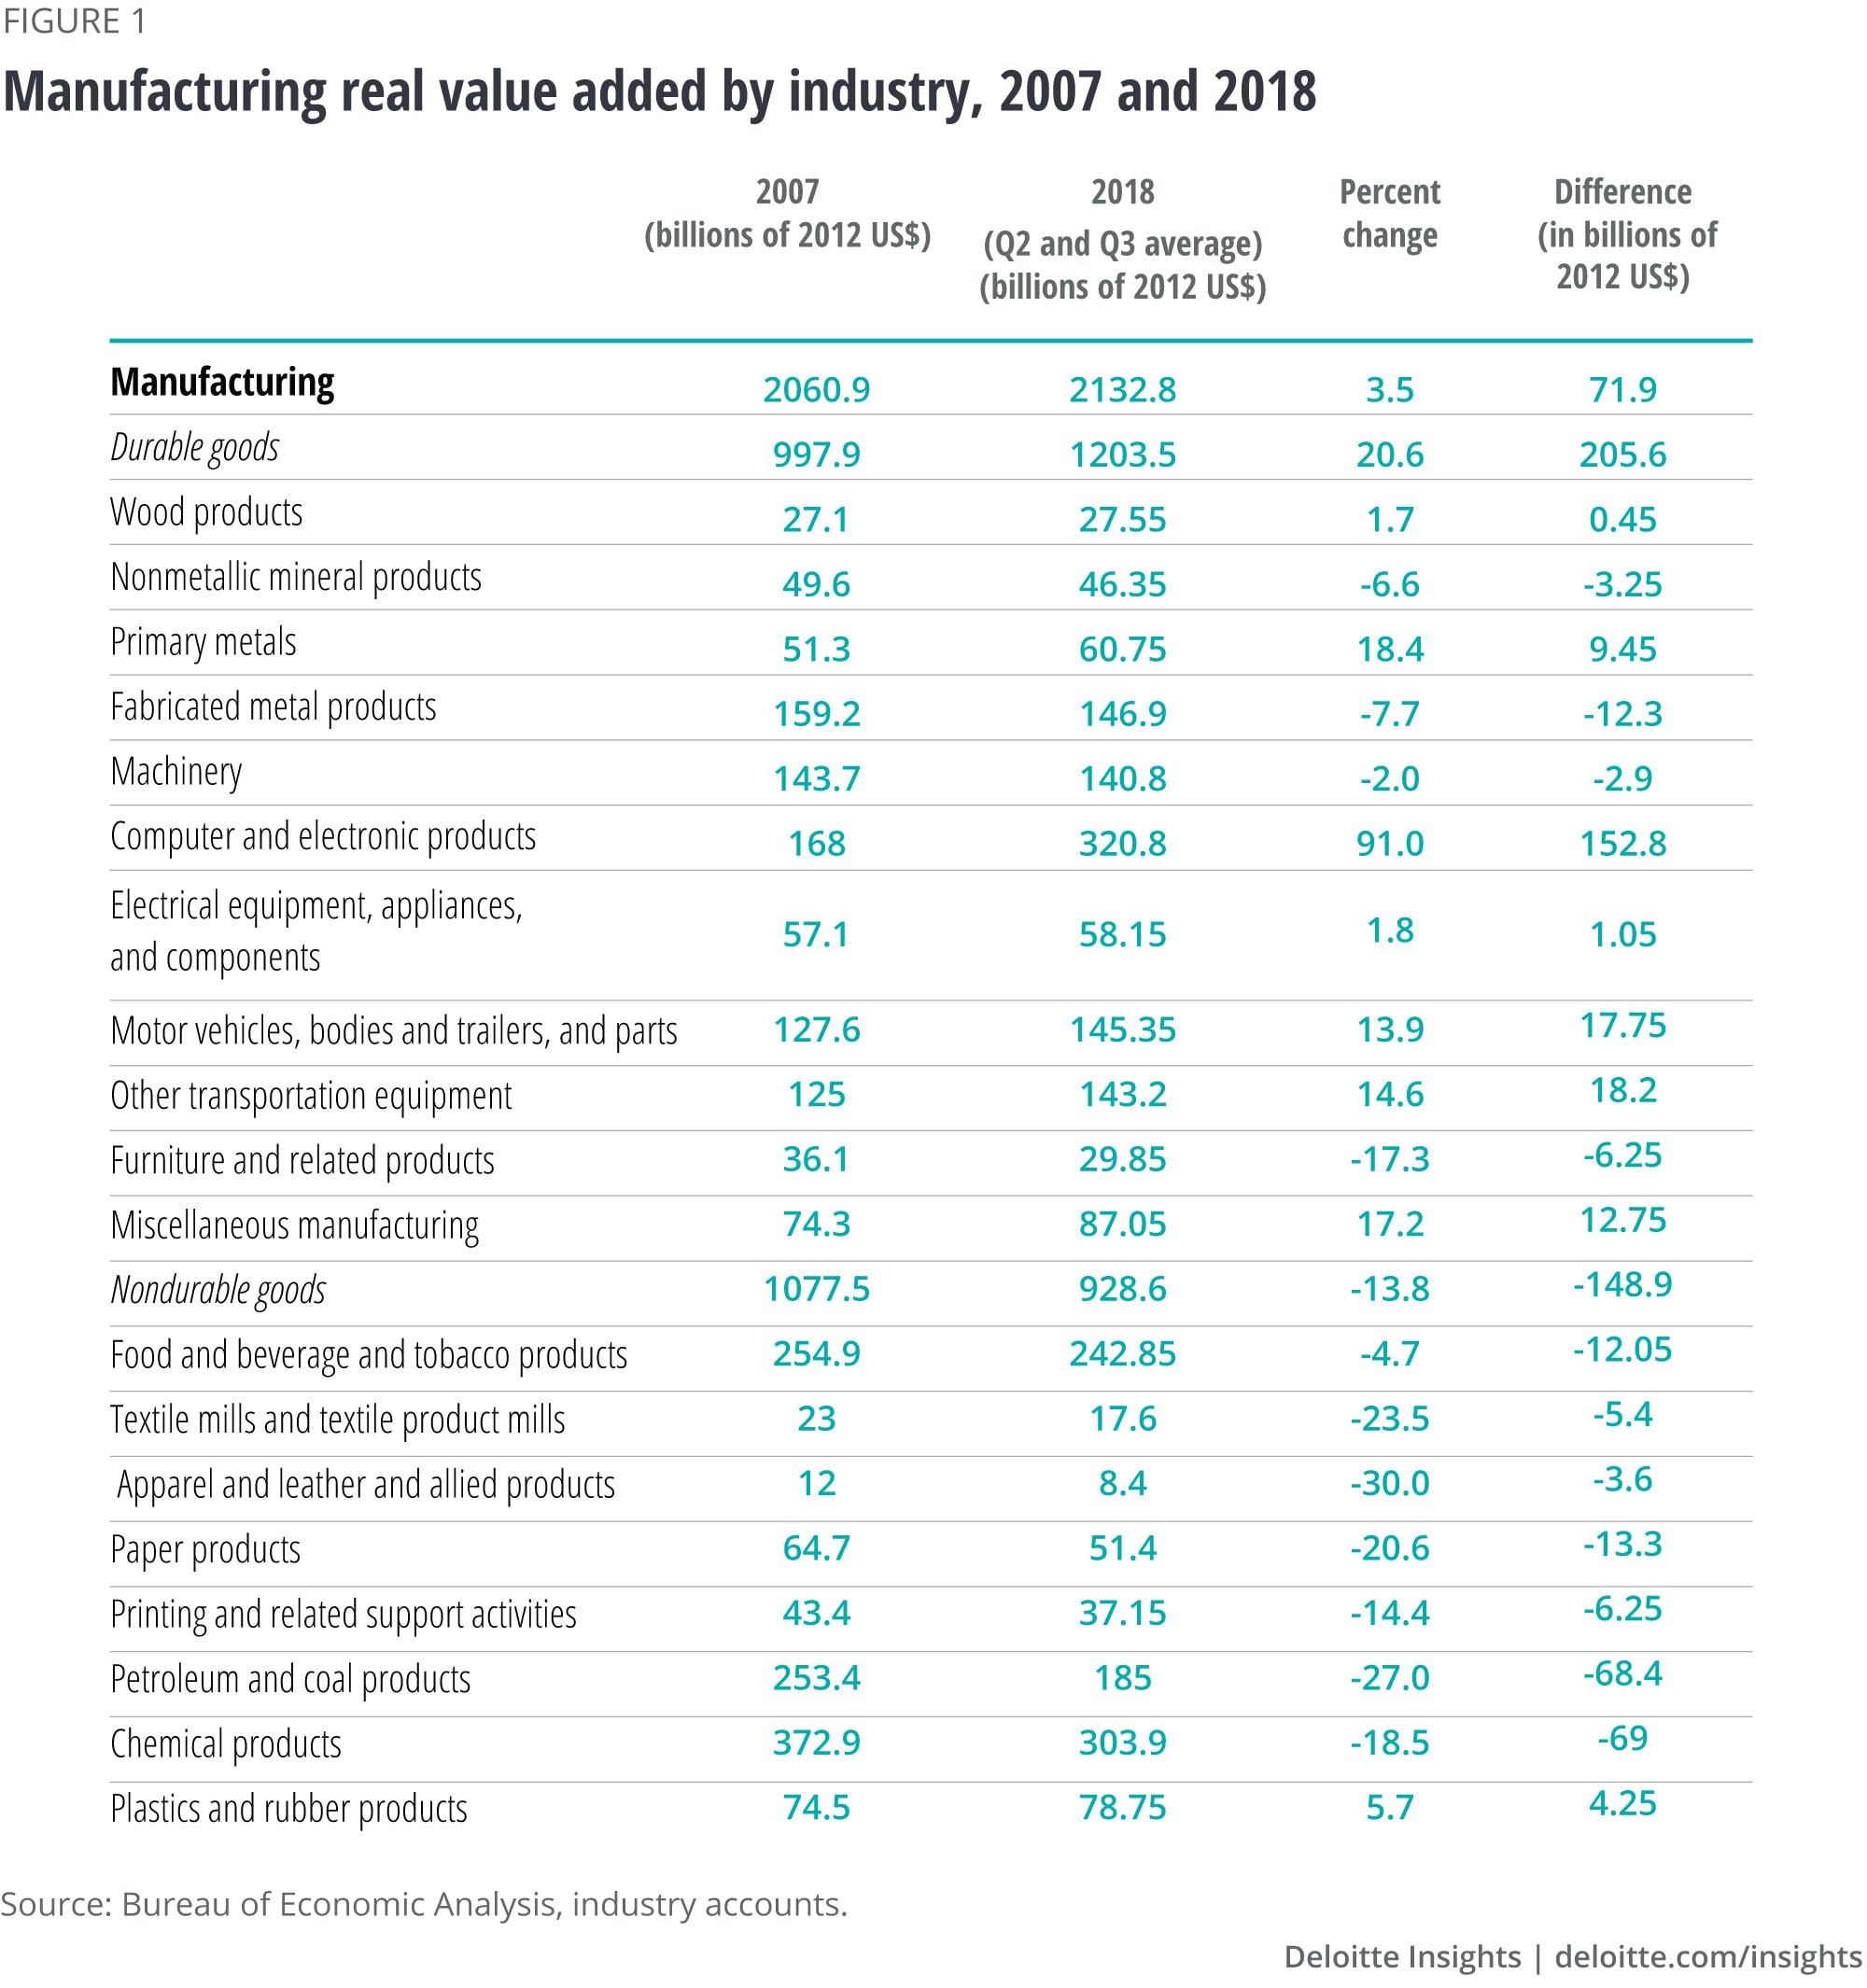 Manufacturing real value added by industry, 2007 and 2018